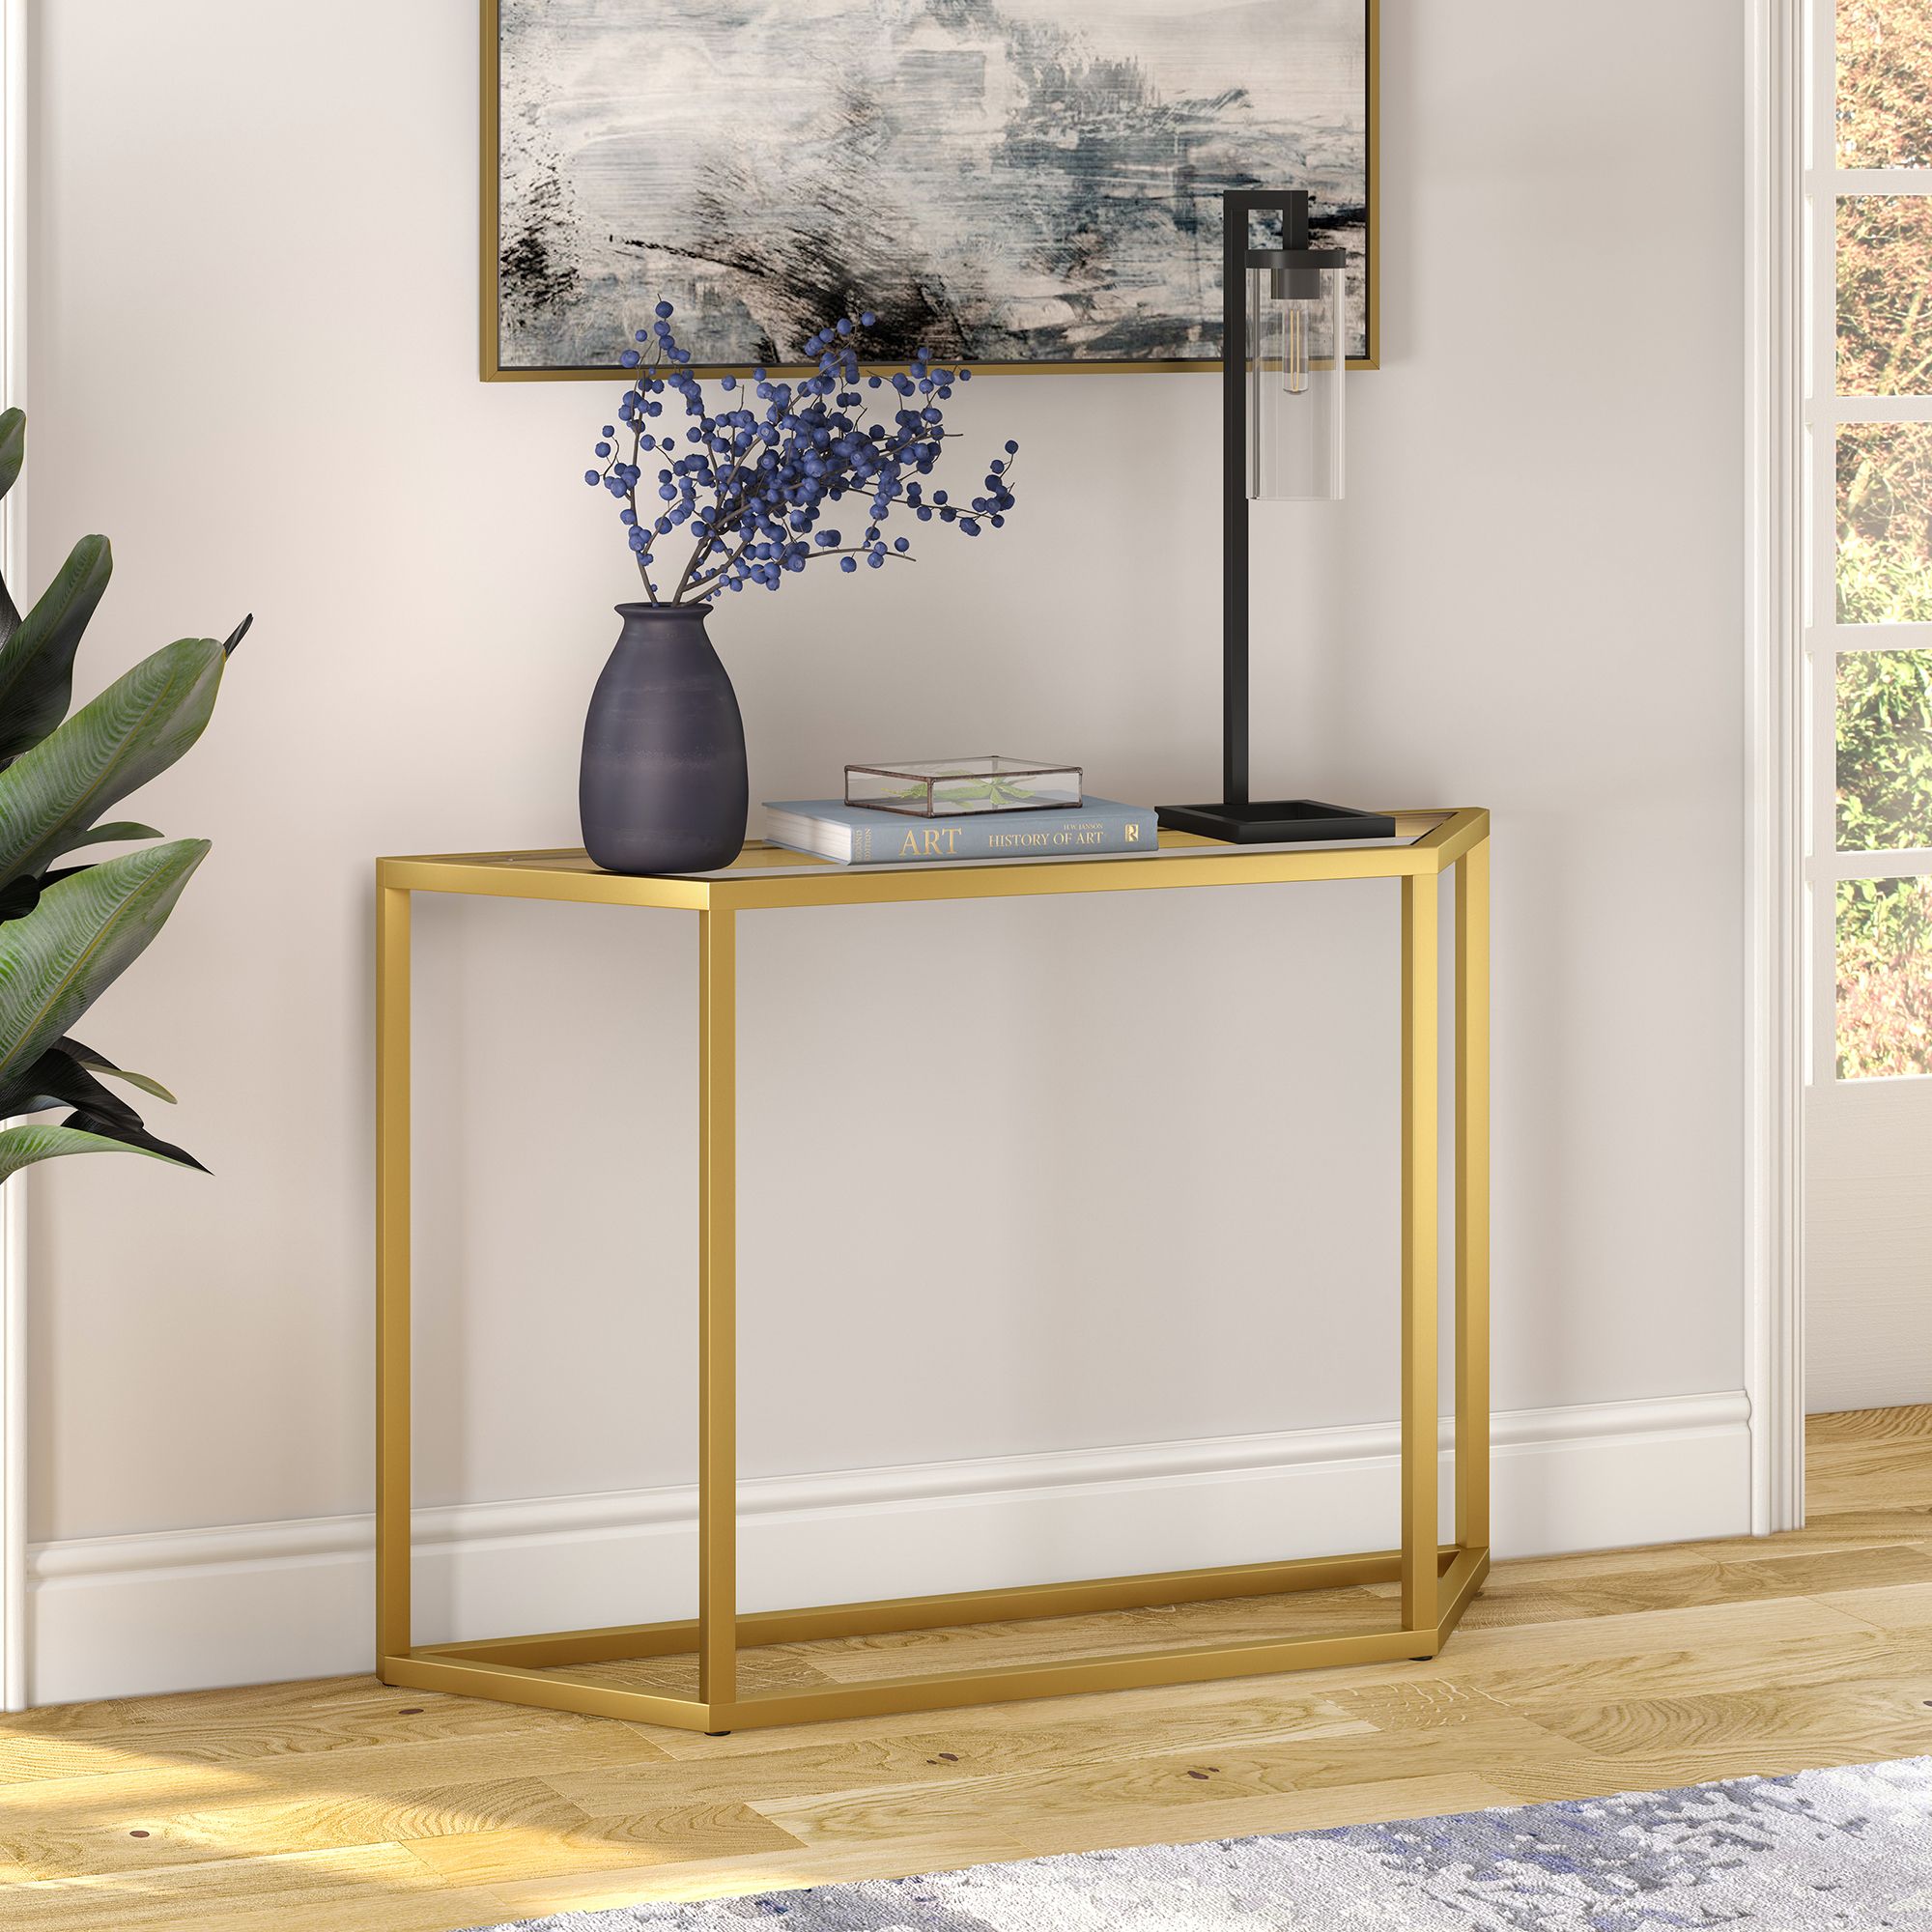 Evelyn&zoe Modern Console Table With Glass Top And Shelf – Walmart Regarding Chrome And Glass Rectangular Console Tables (View 4 of 20)